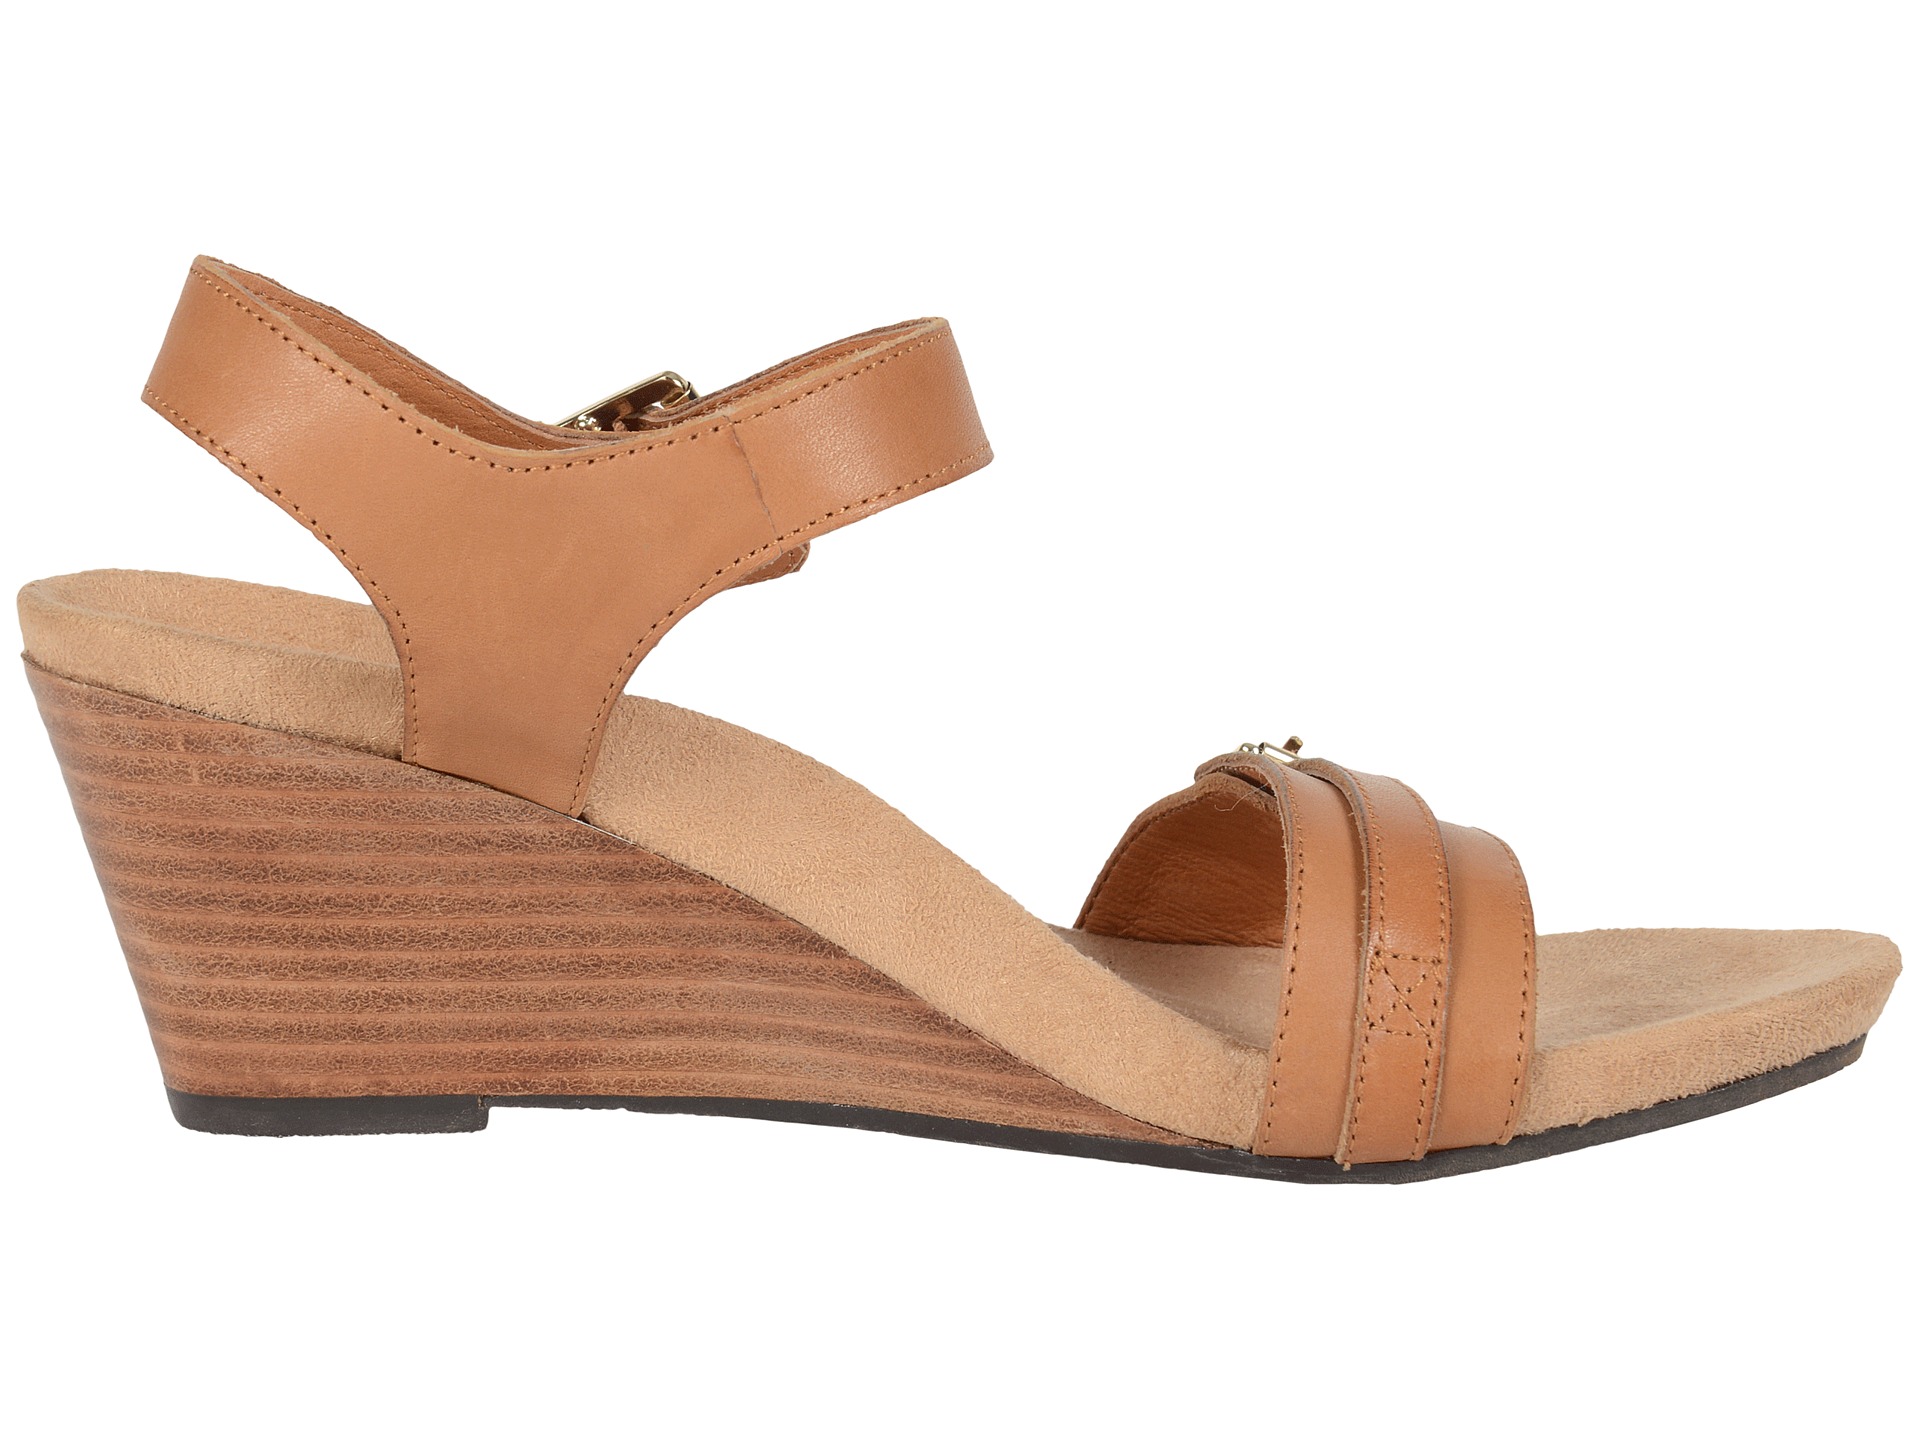 VIONIC Laurie Natural - Zappos.com Free Shipping BOTH Ways